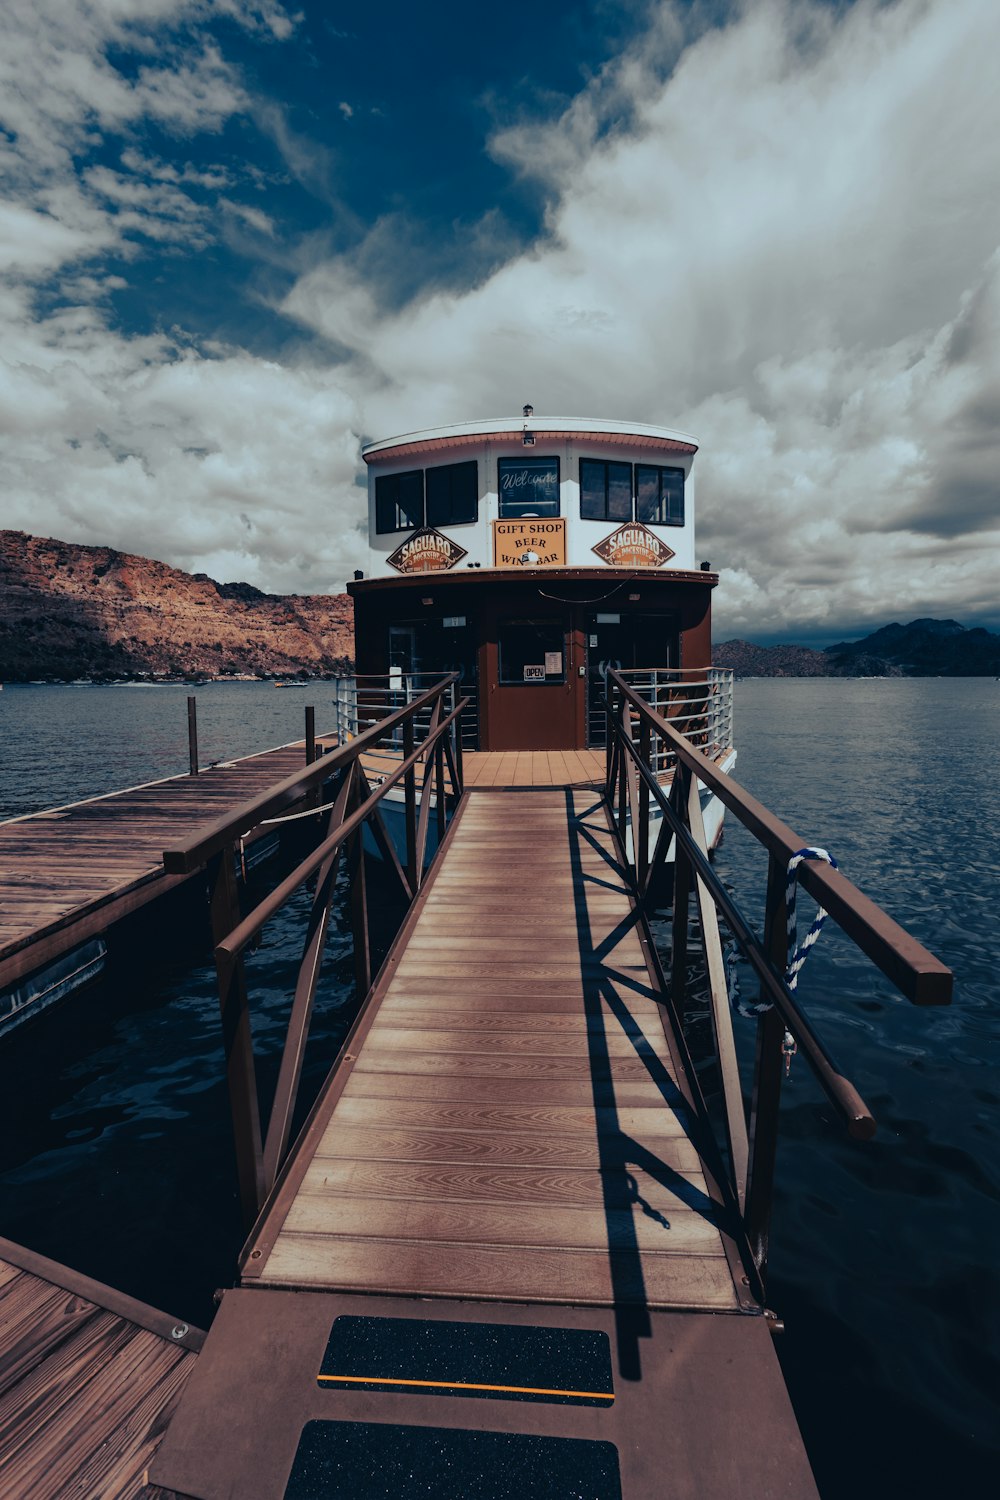 a boat docked at a pier on a lake